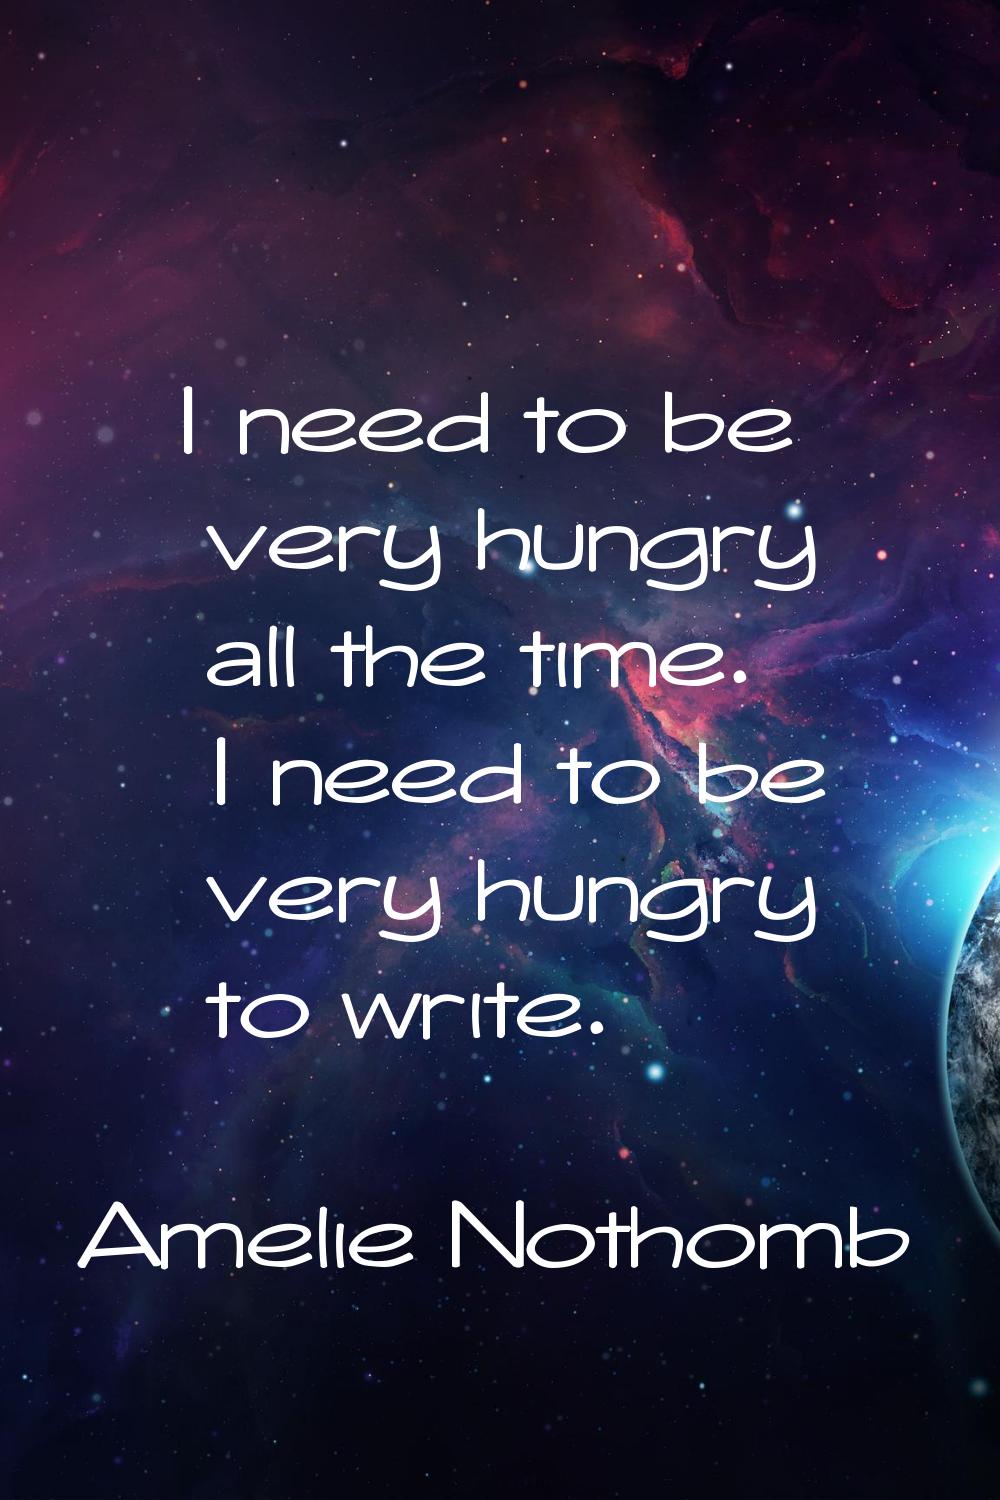 I need to be very hungry all the time. I need to be very hungry to write.